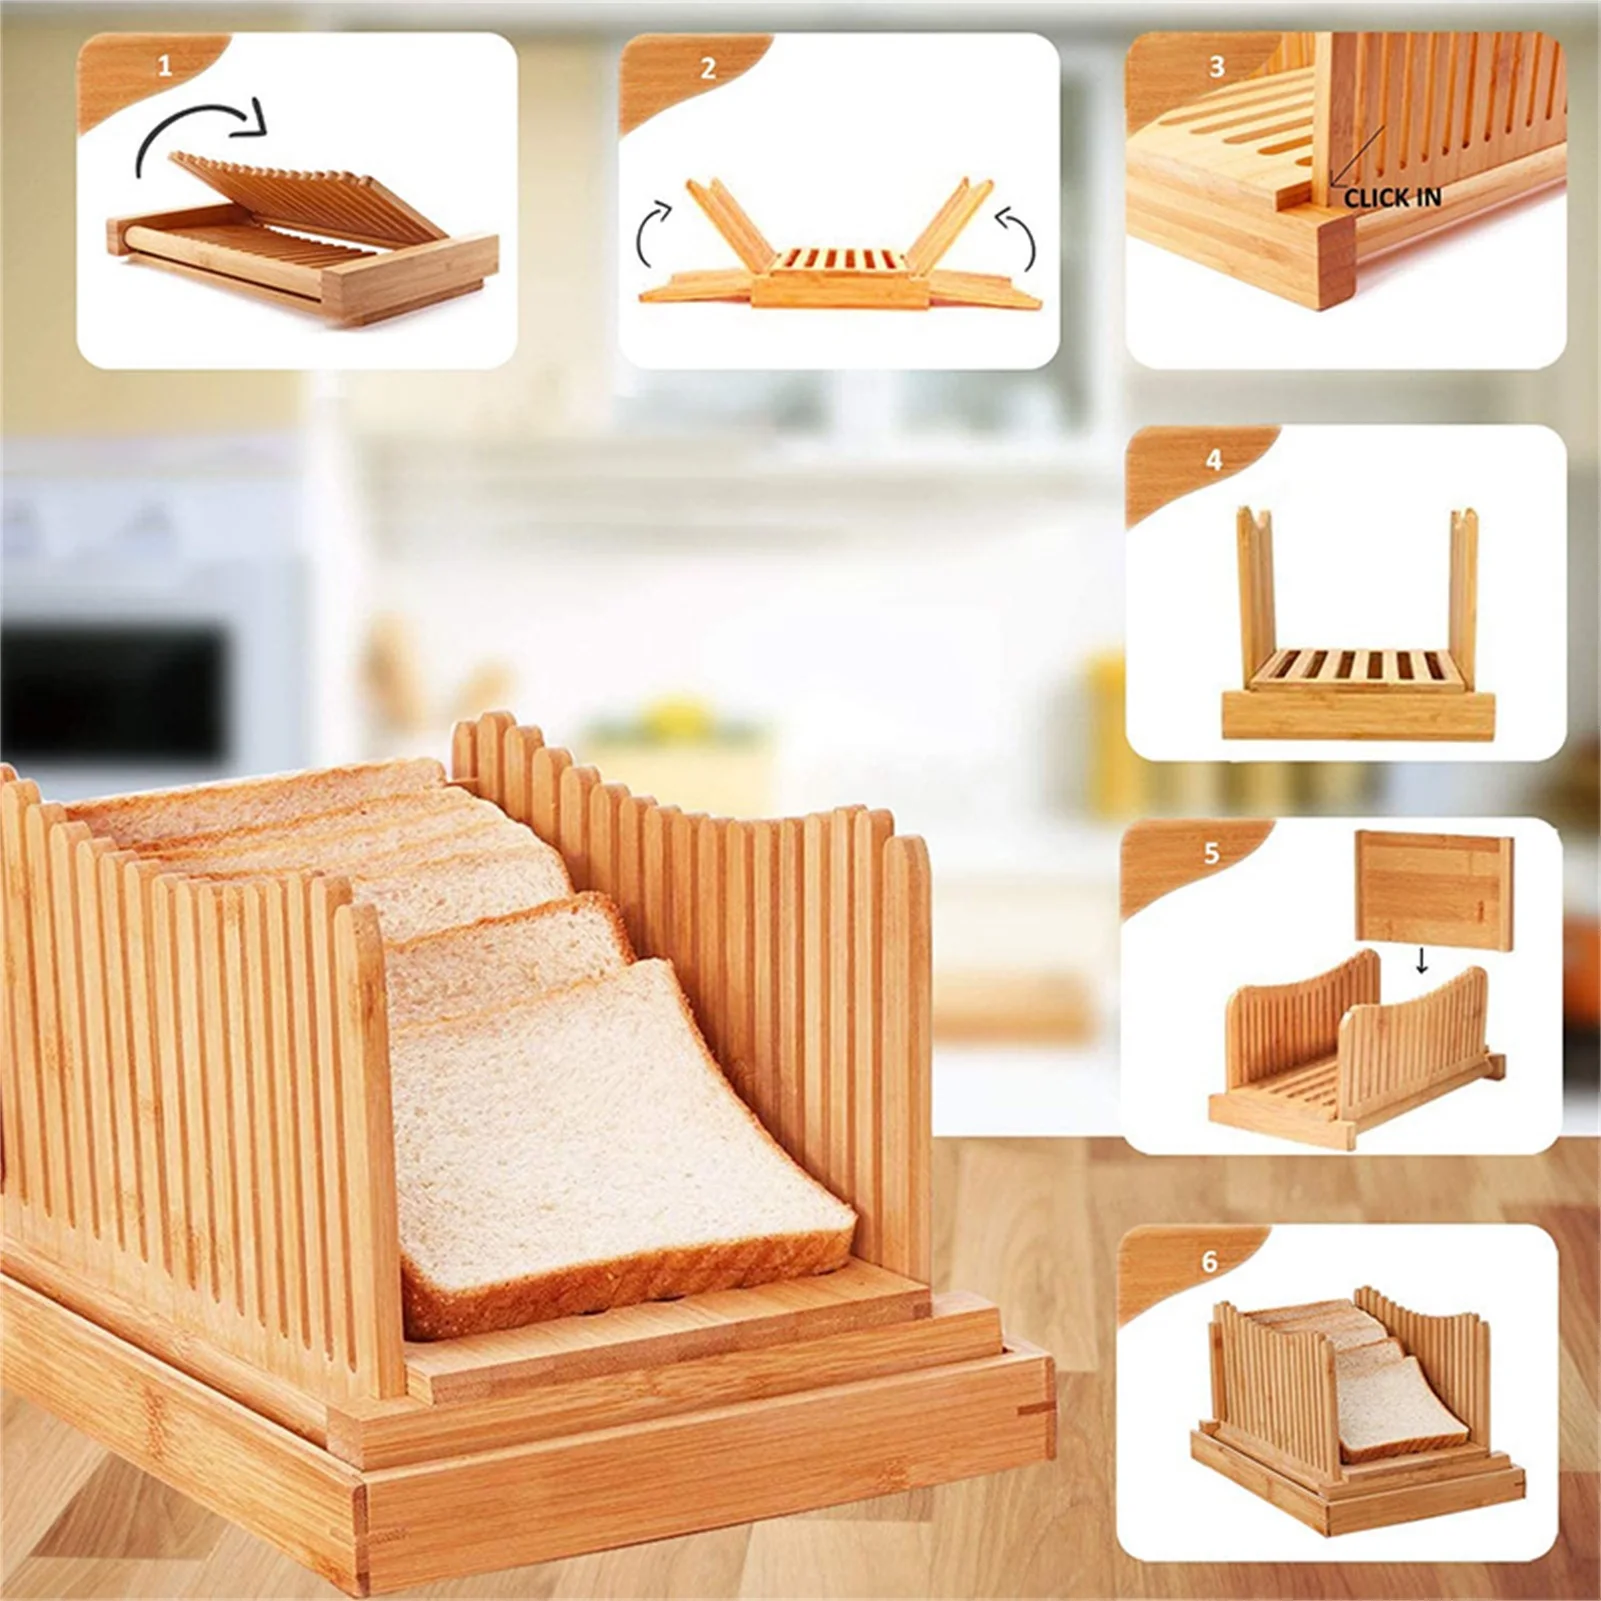 https://ae01.alicdn.com/kf/H084948e10a014ec2941c2c646fa0abc3D/Bamboo-Bread-Slicer-With-Crumb-Tray-Cutting-Guide-Wood-Bread-Cutter-For-Homemade-Bread-Loaf-Cakes.jpg